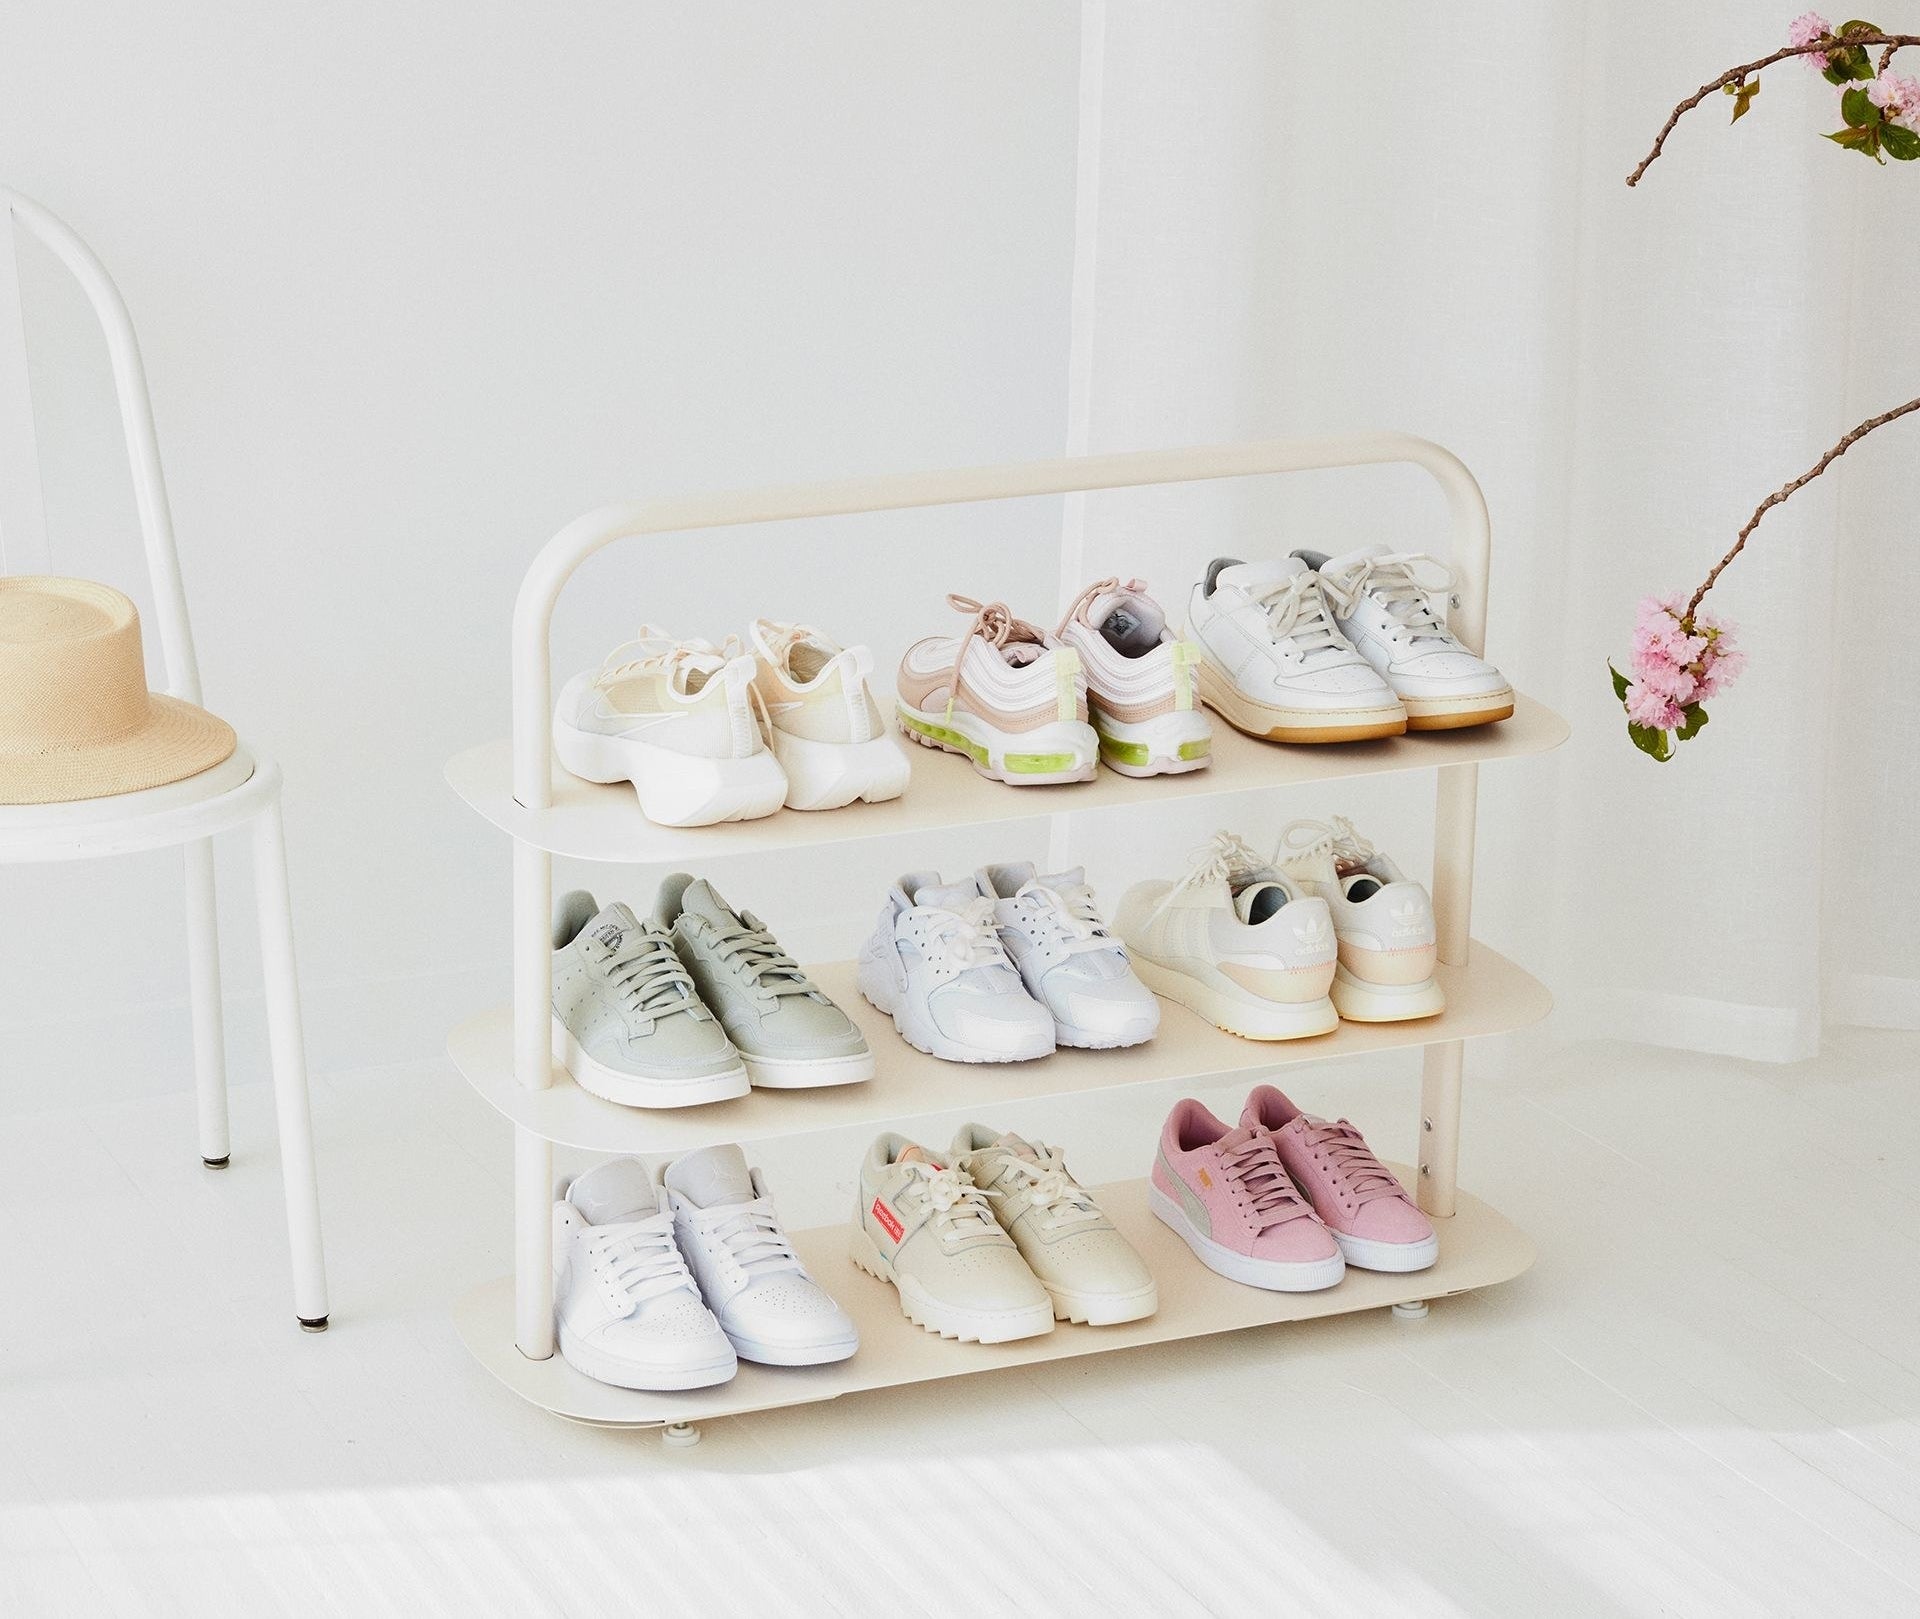 15 Stylish and Practical Entryway Shoe Storage Solutions - VisualHunt